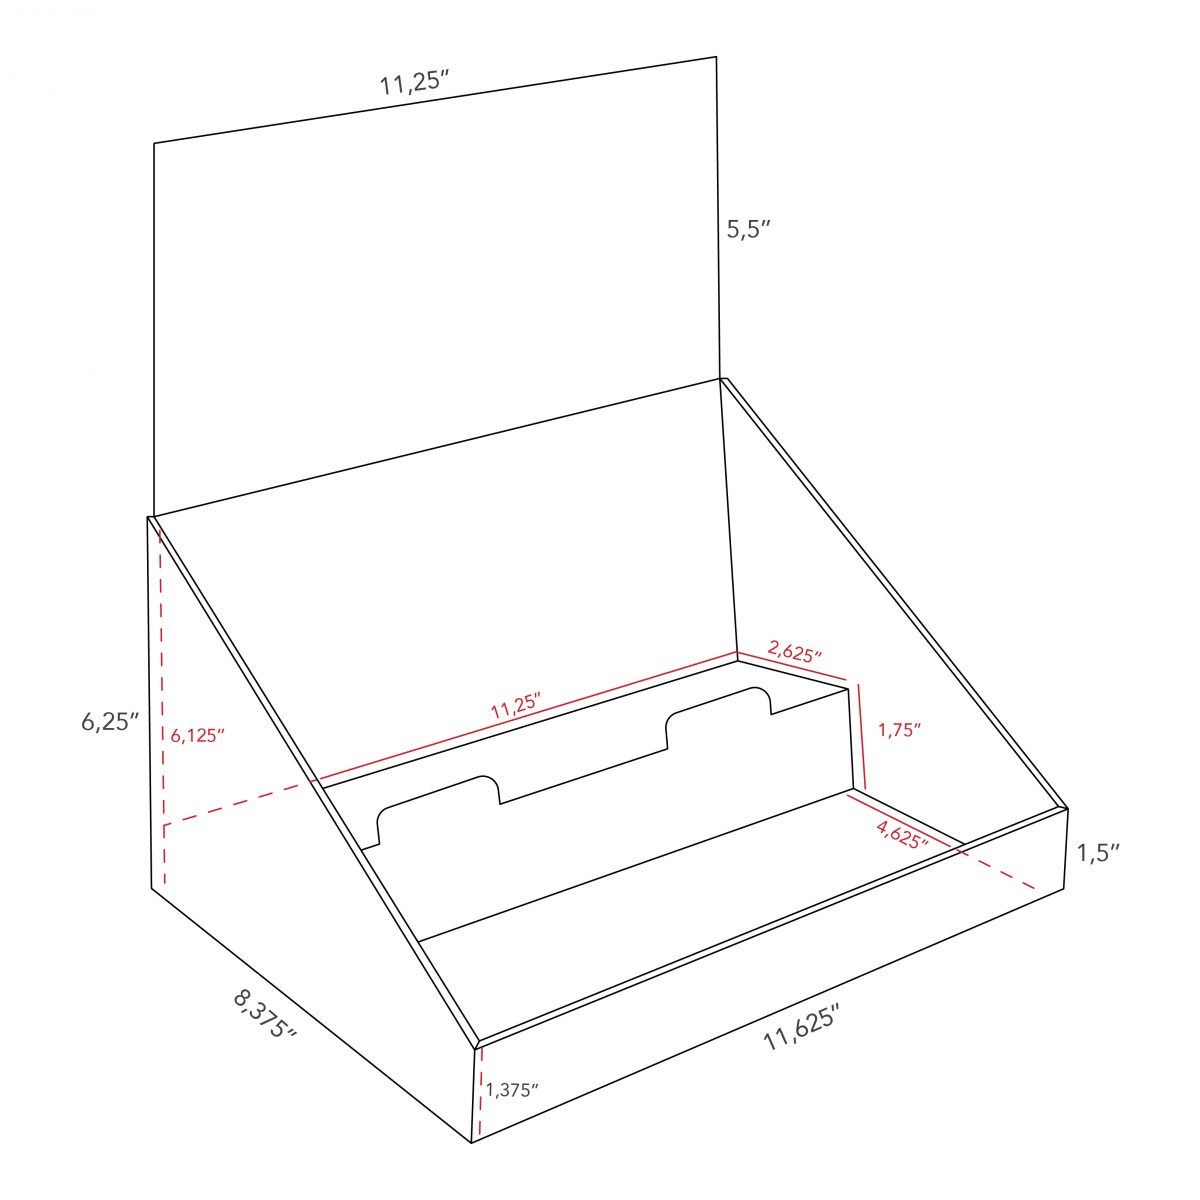 Cardboard counter display with 2 levels/shelves with header - dimensions